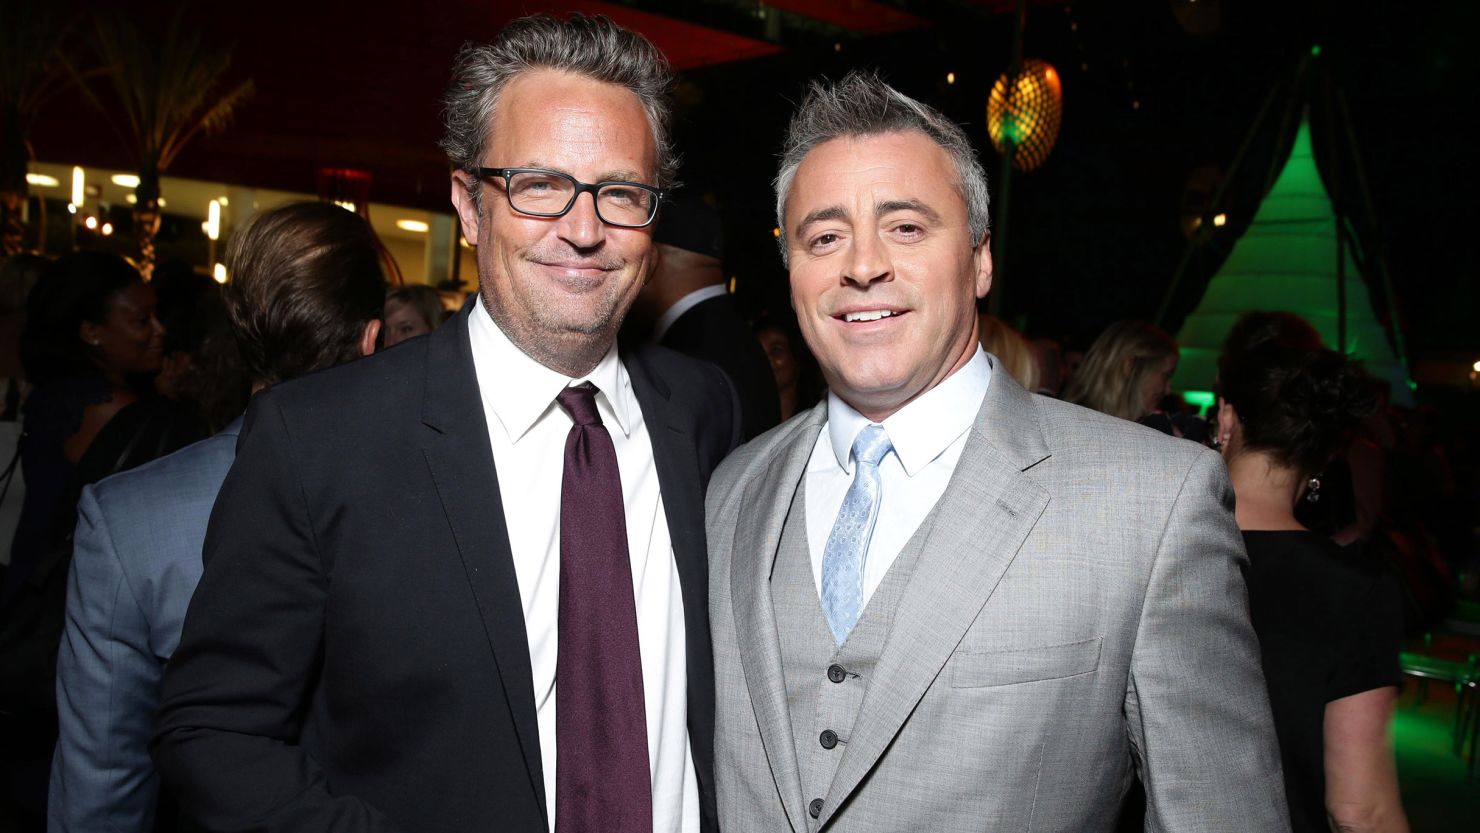 Mandatory Credit: Photo by Eric Charbonneau/Shutterstock (4937725cm)
Matthew Perry, Matt LeBlanc
'Stars Party' - CBS, SHOWTIME, The CW and CBS Television Distribution, Los Angeles, America - 10 Aug 2015